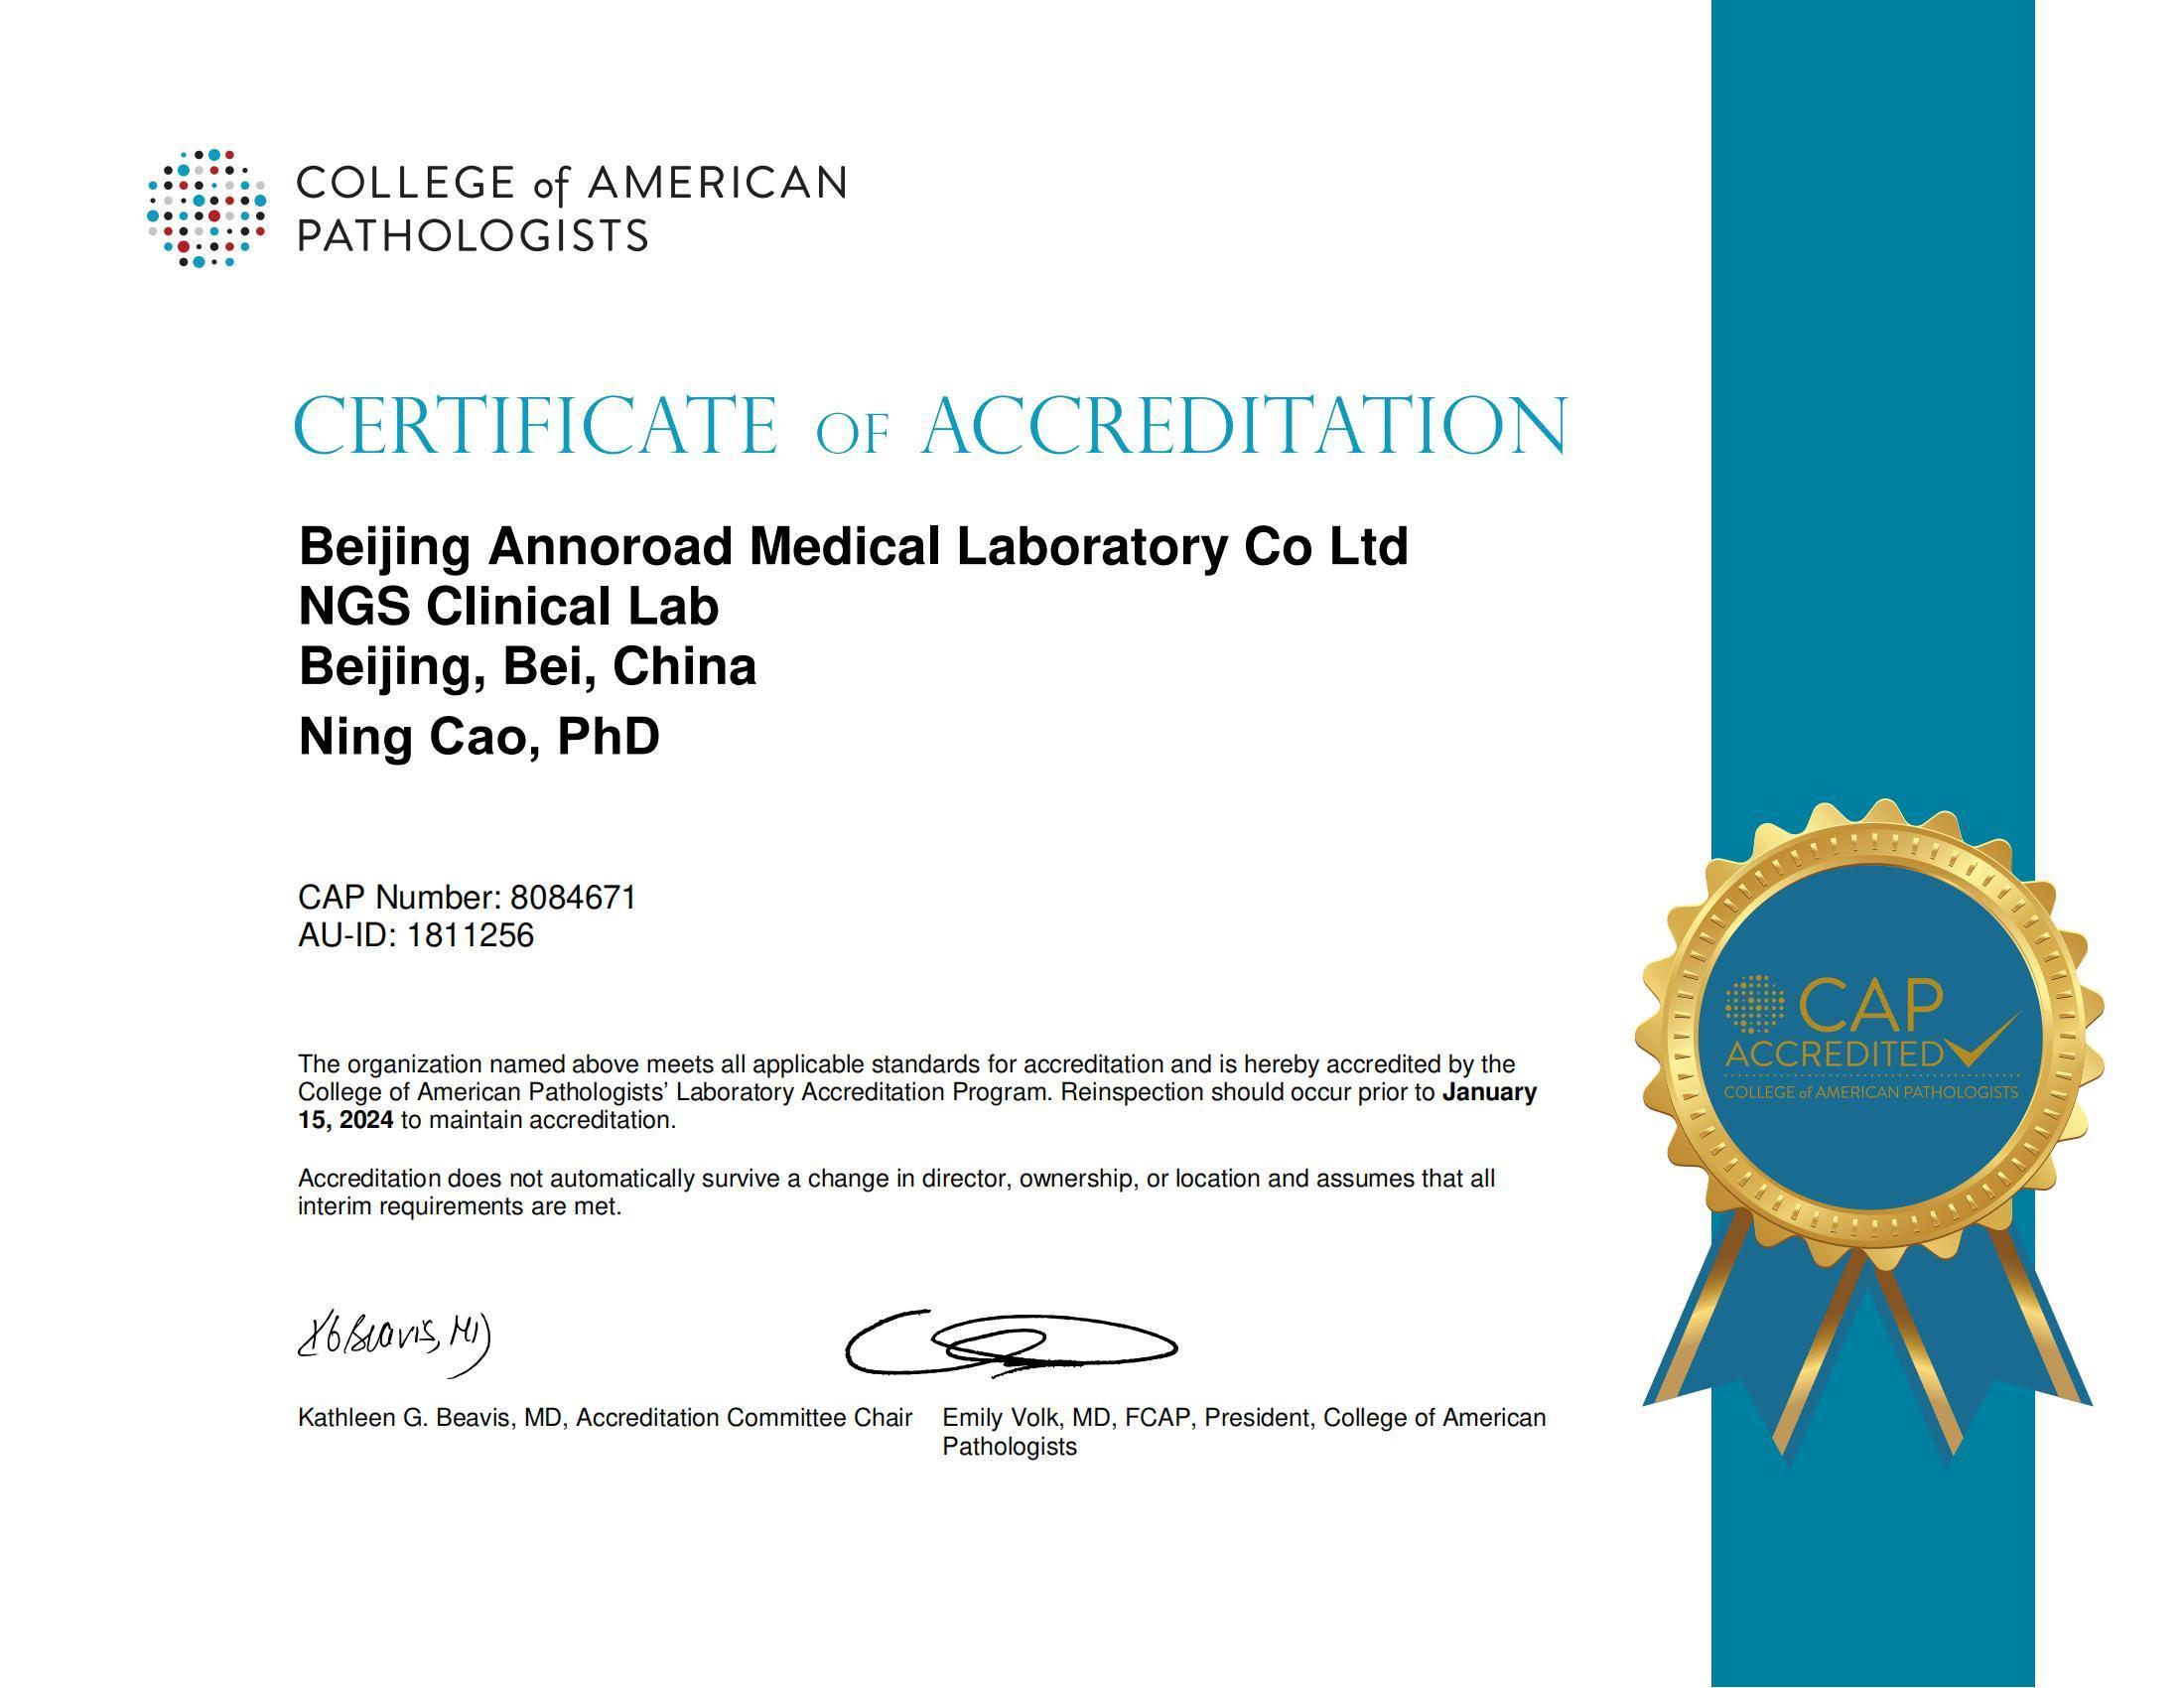 Authentication Certificate of College of American Pathologists